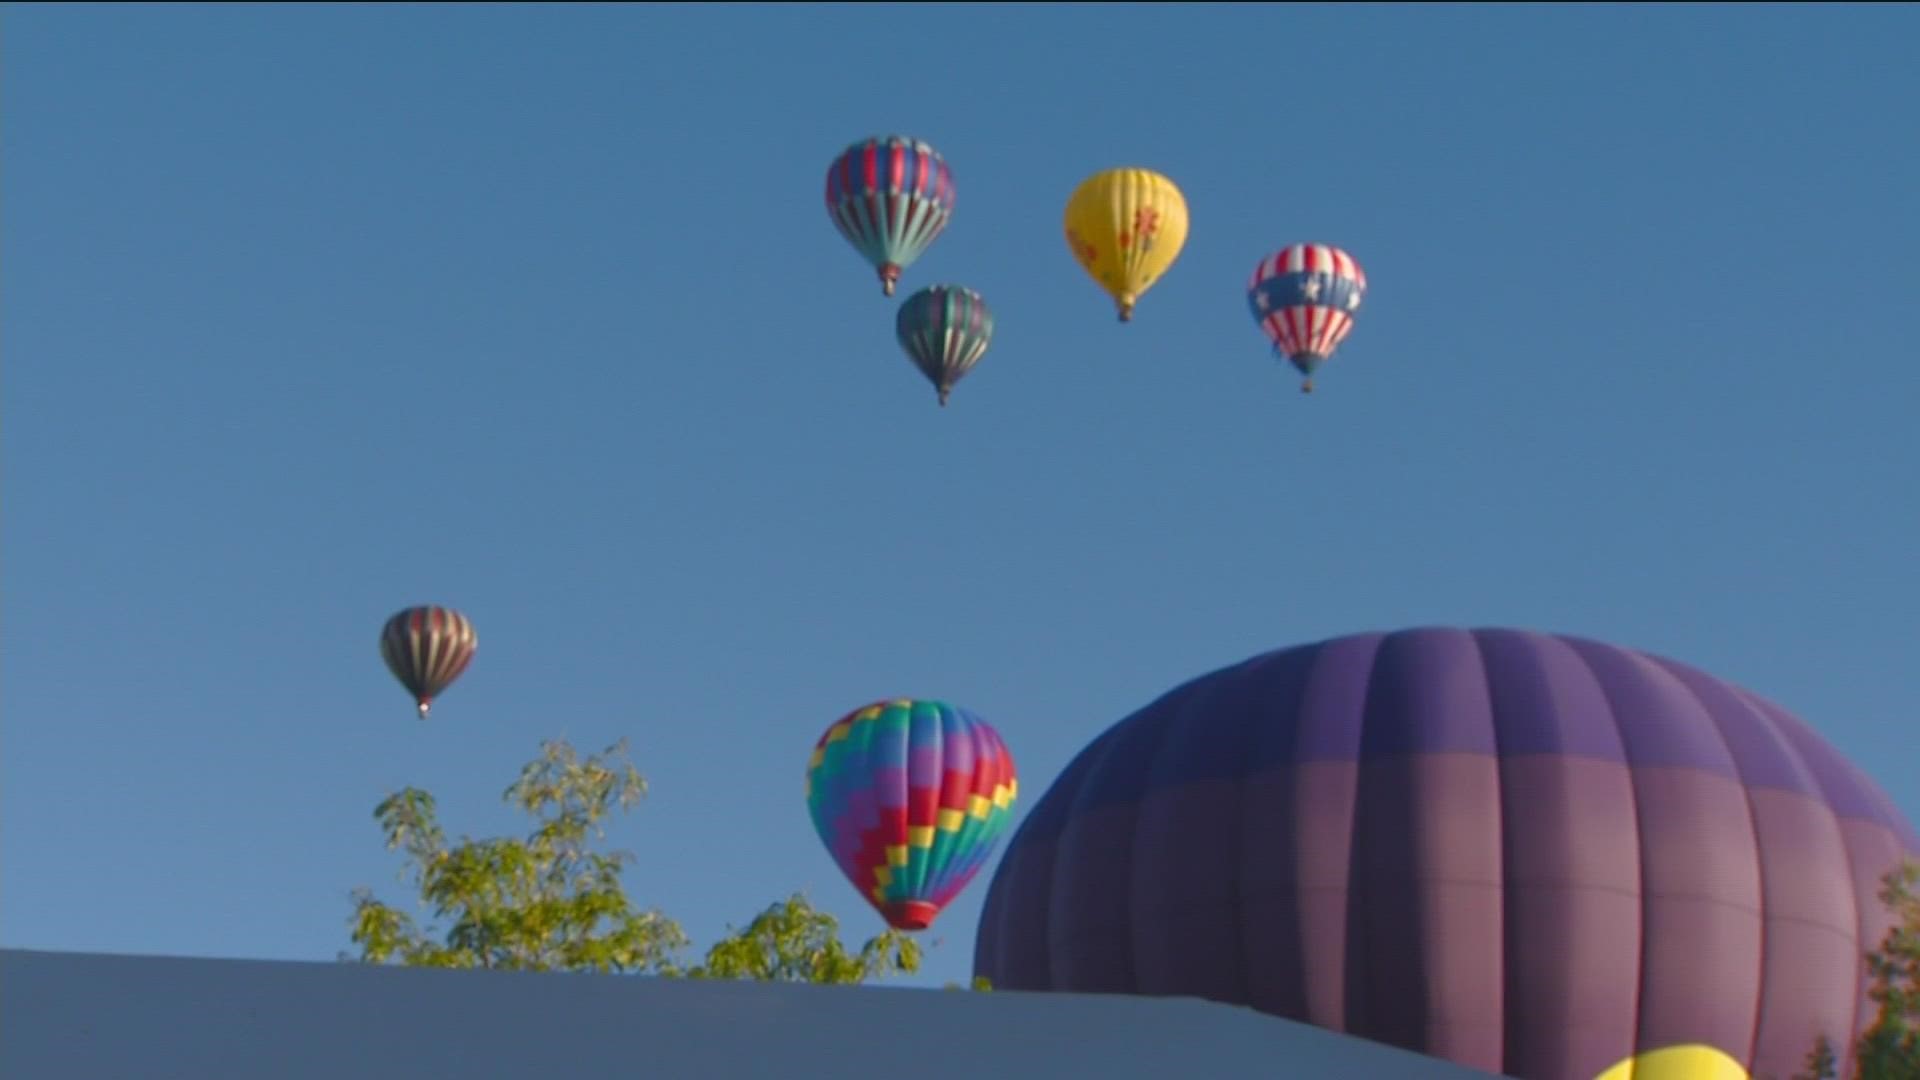 The event will be honoring longtime KTVB meteorologist Larry Gebert, who was heavily involved with the Balloon Classic, broadcasting from it every year.